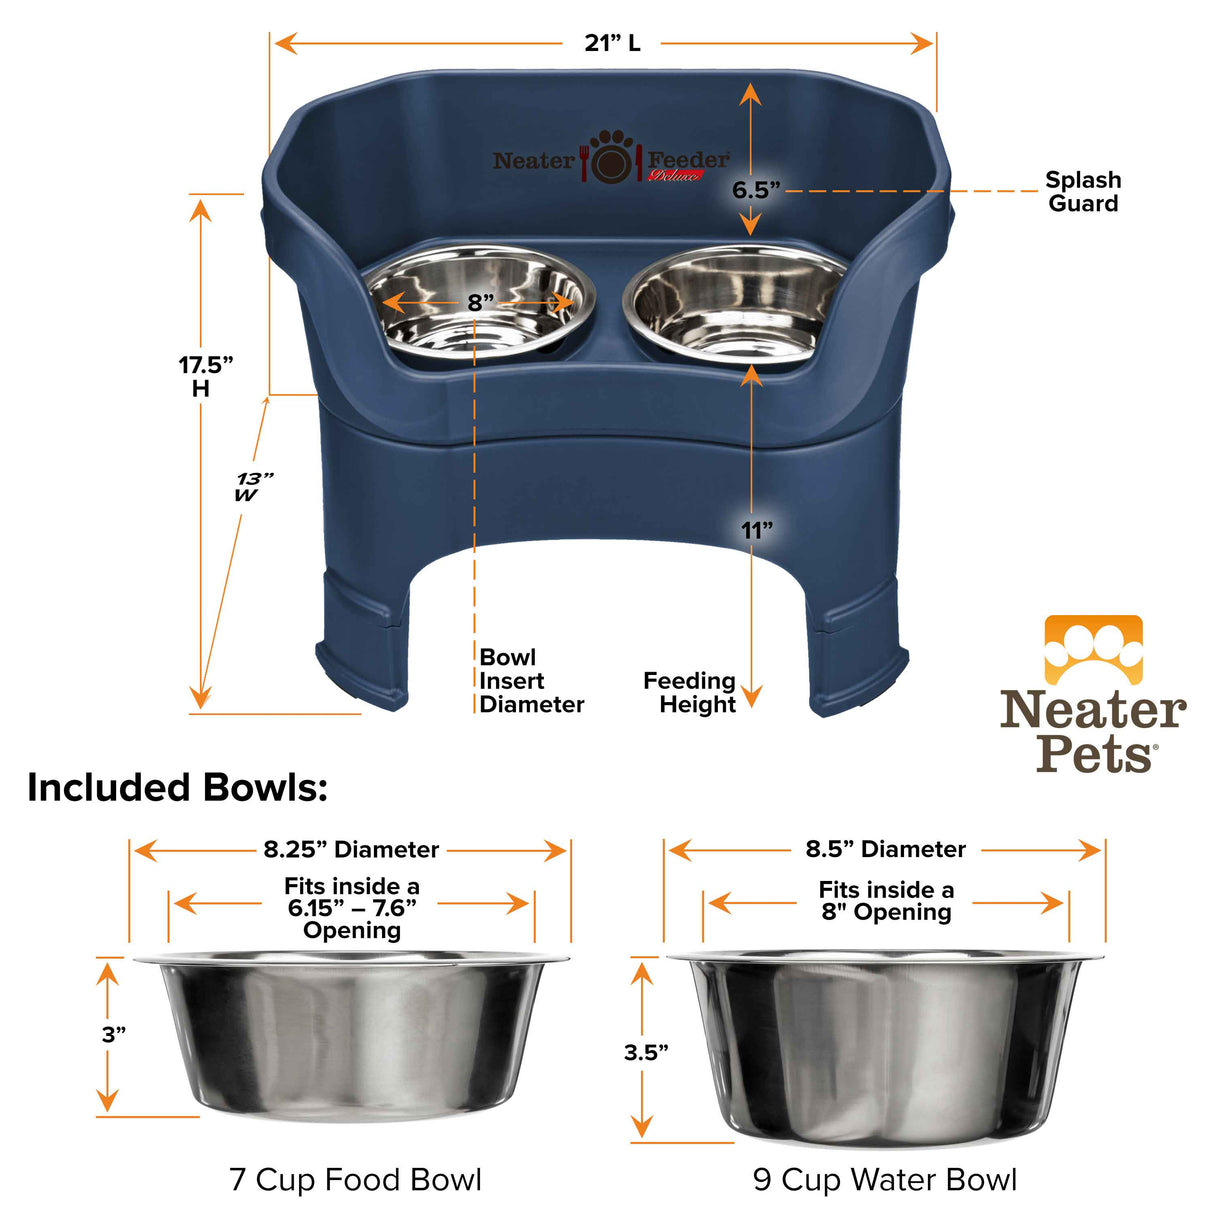 Deluxe large with leg extensions feeder and bowl dimensions